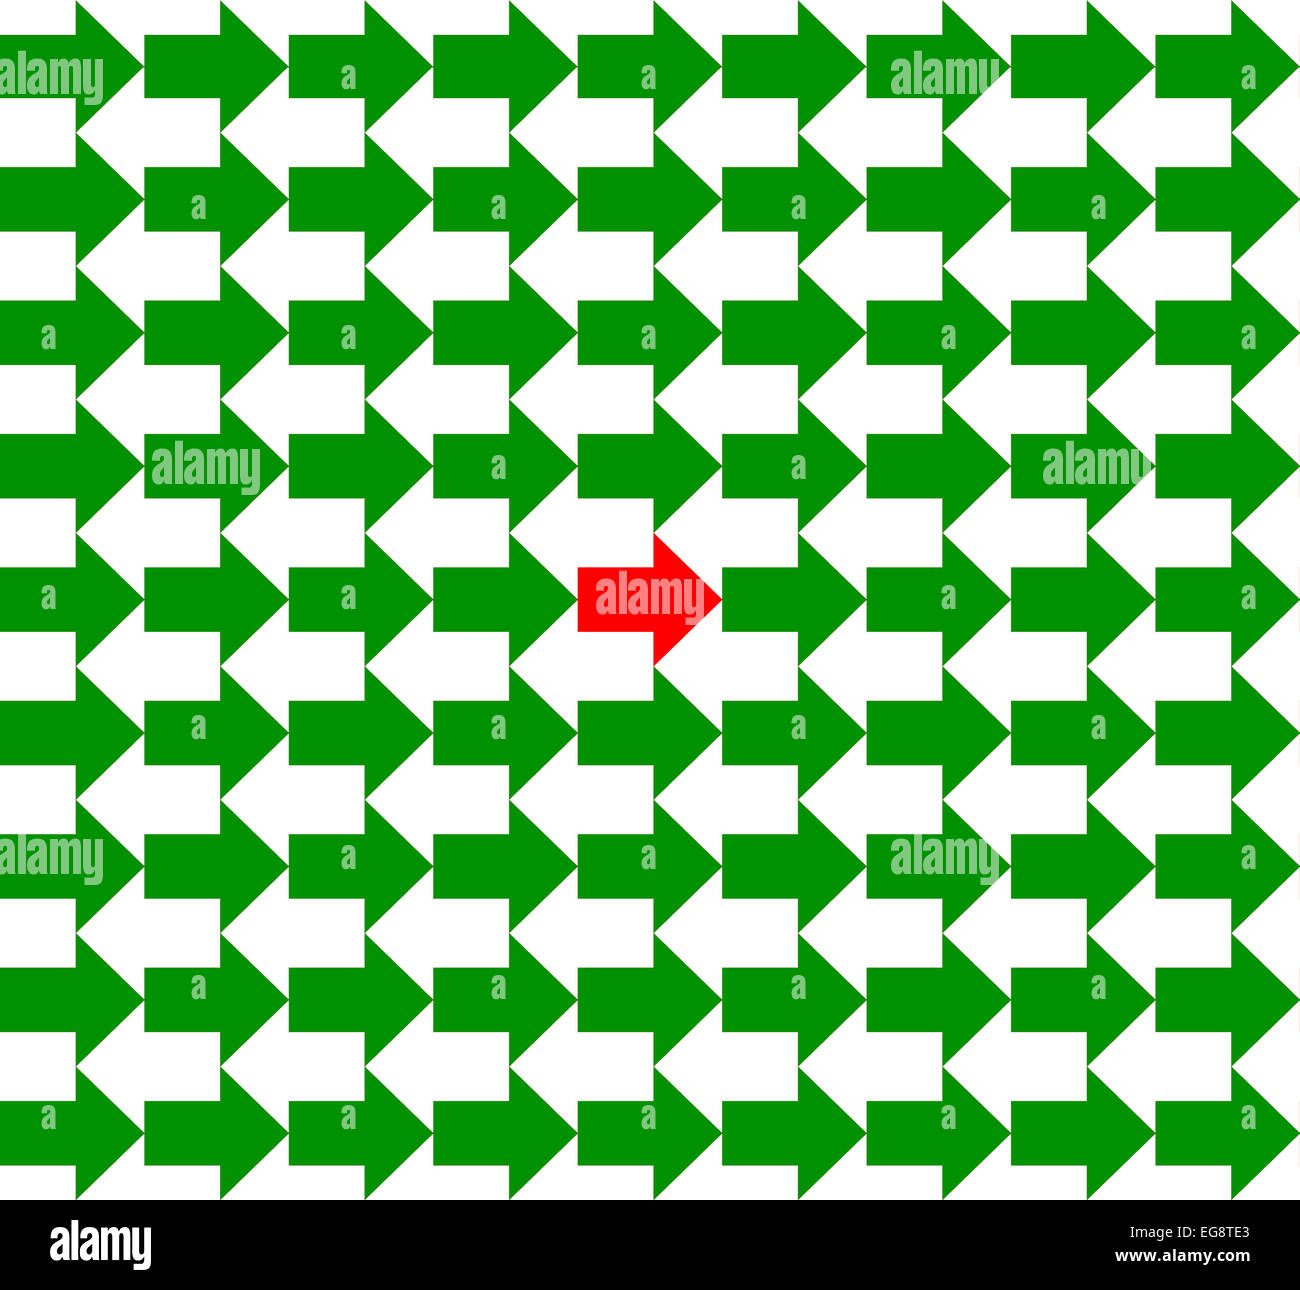 Green and white arrows pointing to opposite directions, with a red one in the middle, seamless pattern Stock Photo